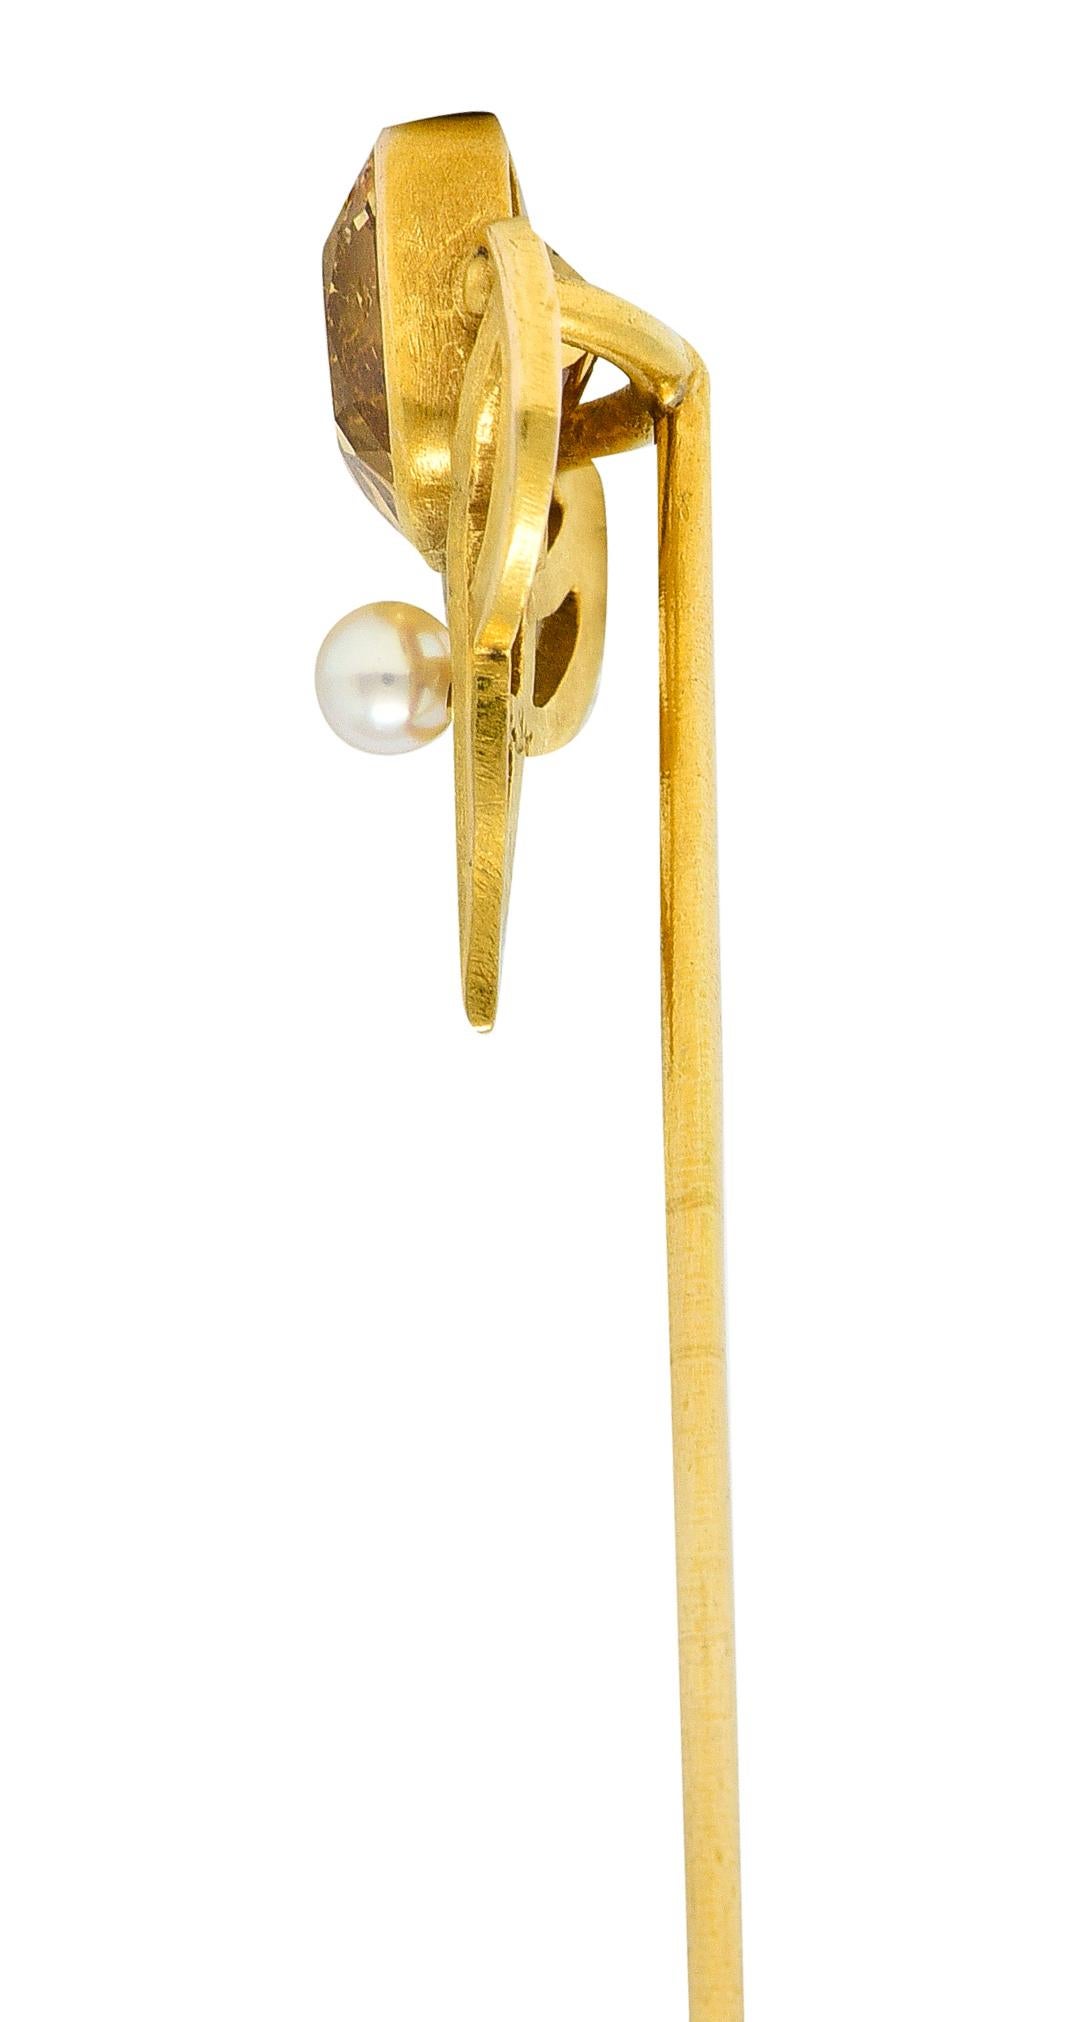 Riker Bros. Art Nouveau 1.73 Carats Heliodor Pearl 14 Karat Yellow Gold Stickpin In Excellent Condition For Sale In Philadelphia, PA